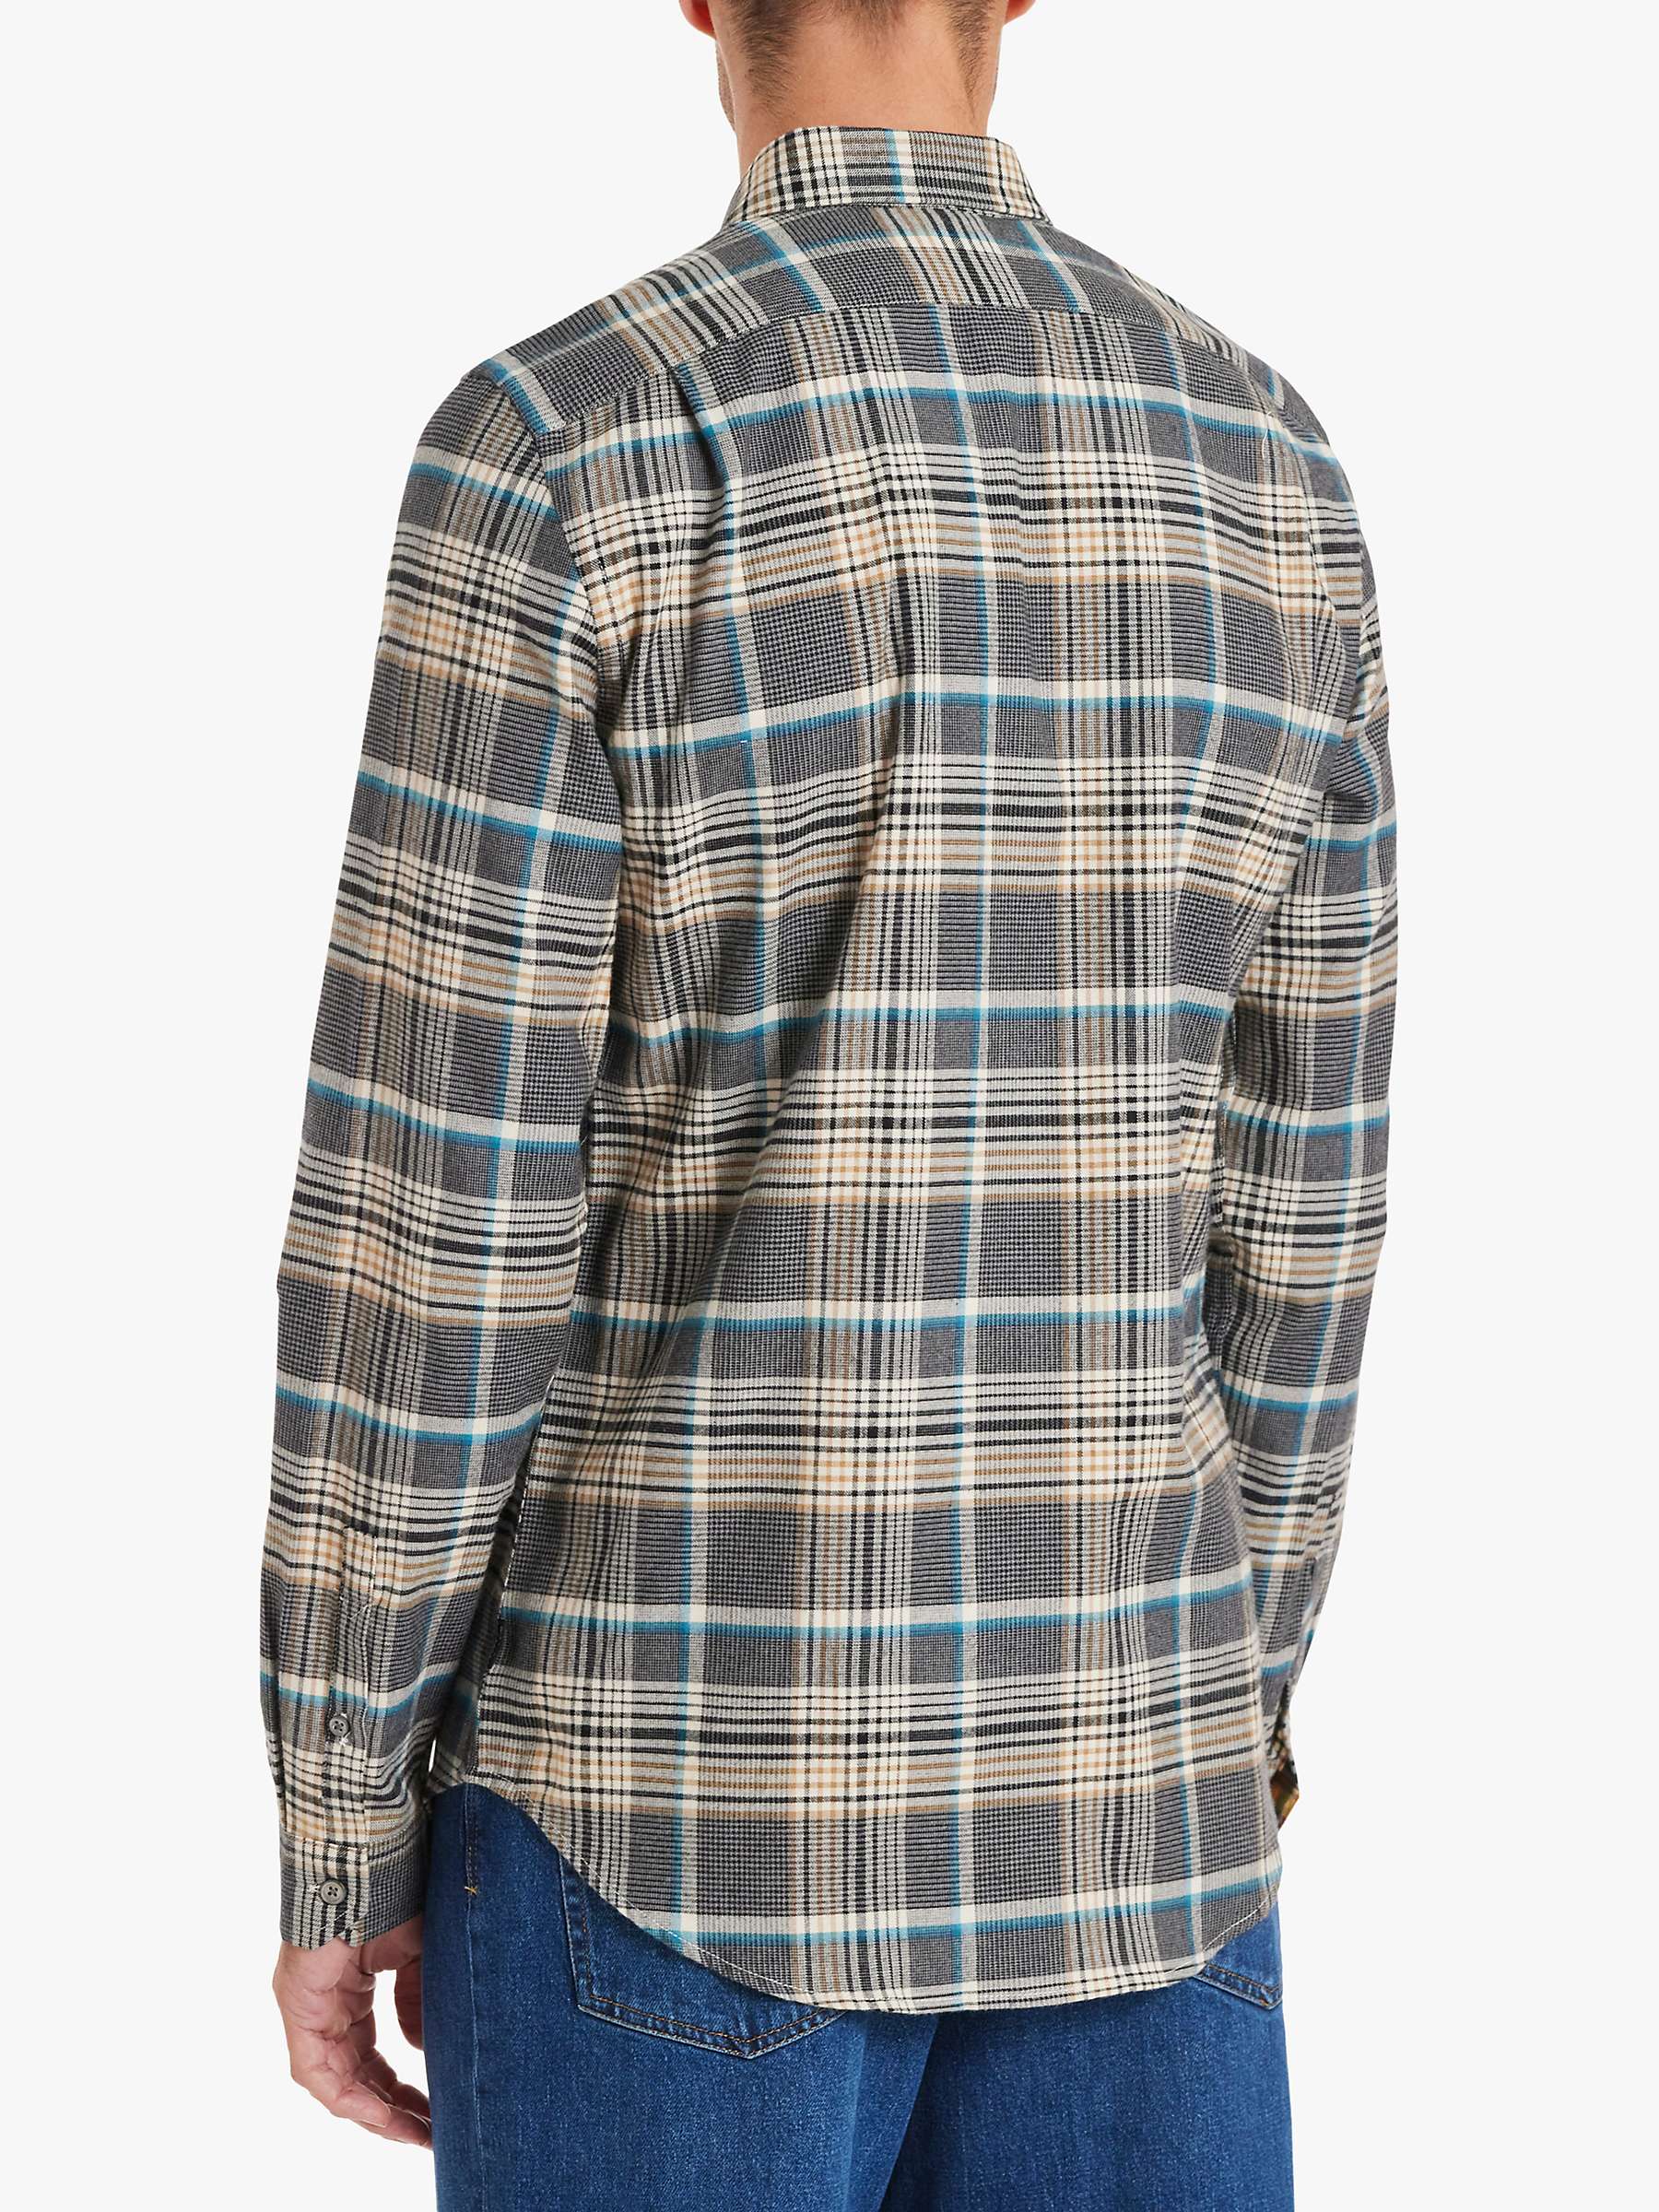 Buy Paul Smith Plaid Print Tailored Fit Shirt, Grey/Multi Online at johnlewis.com